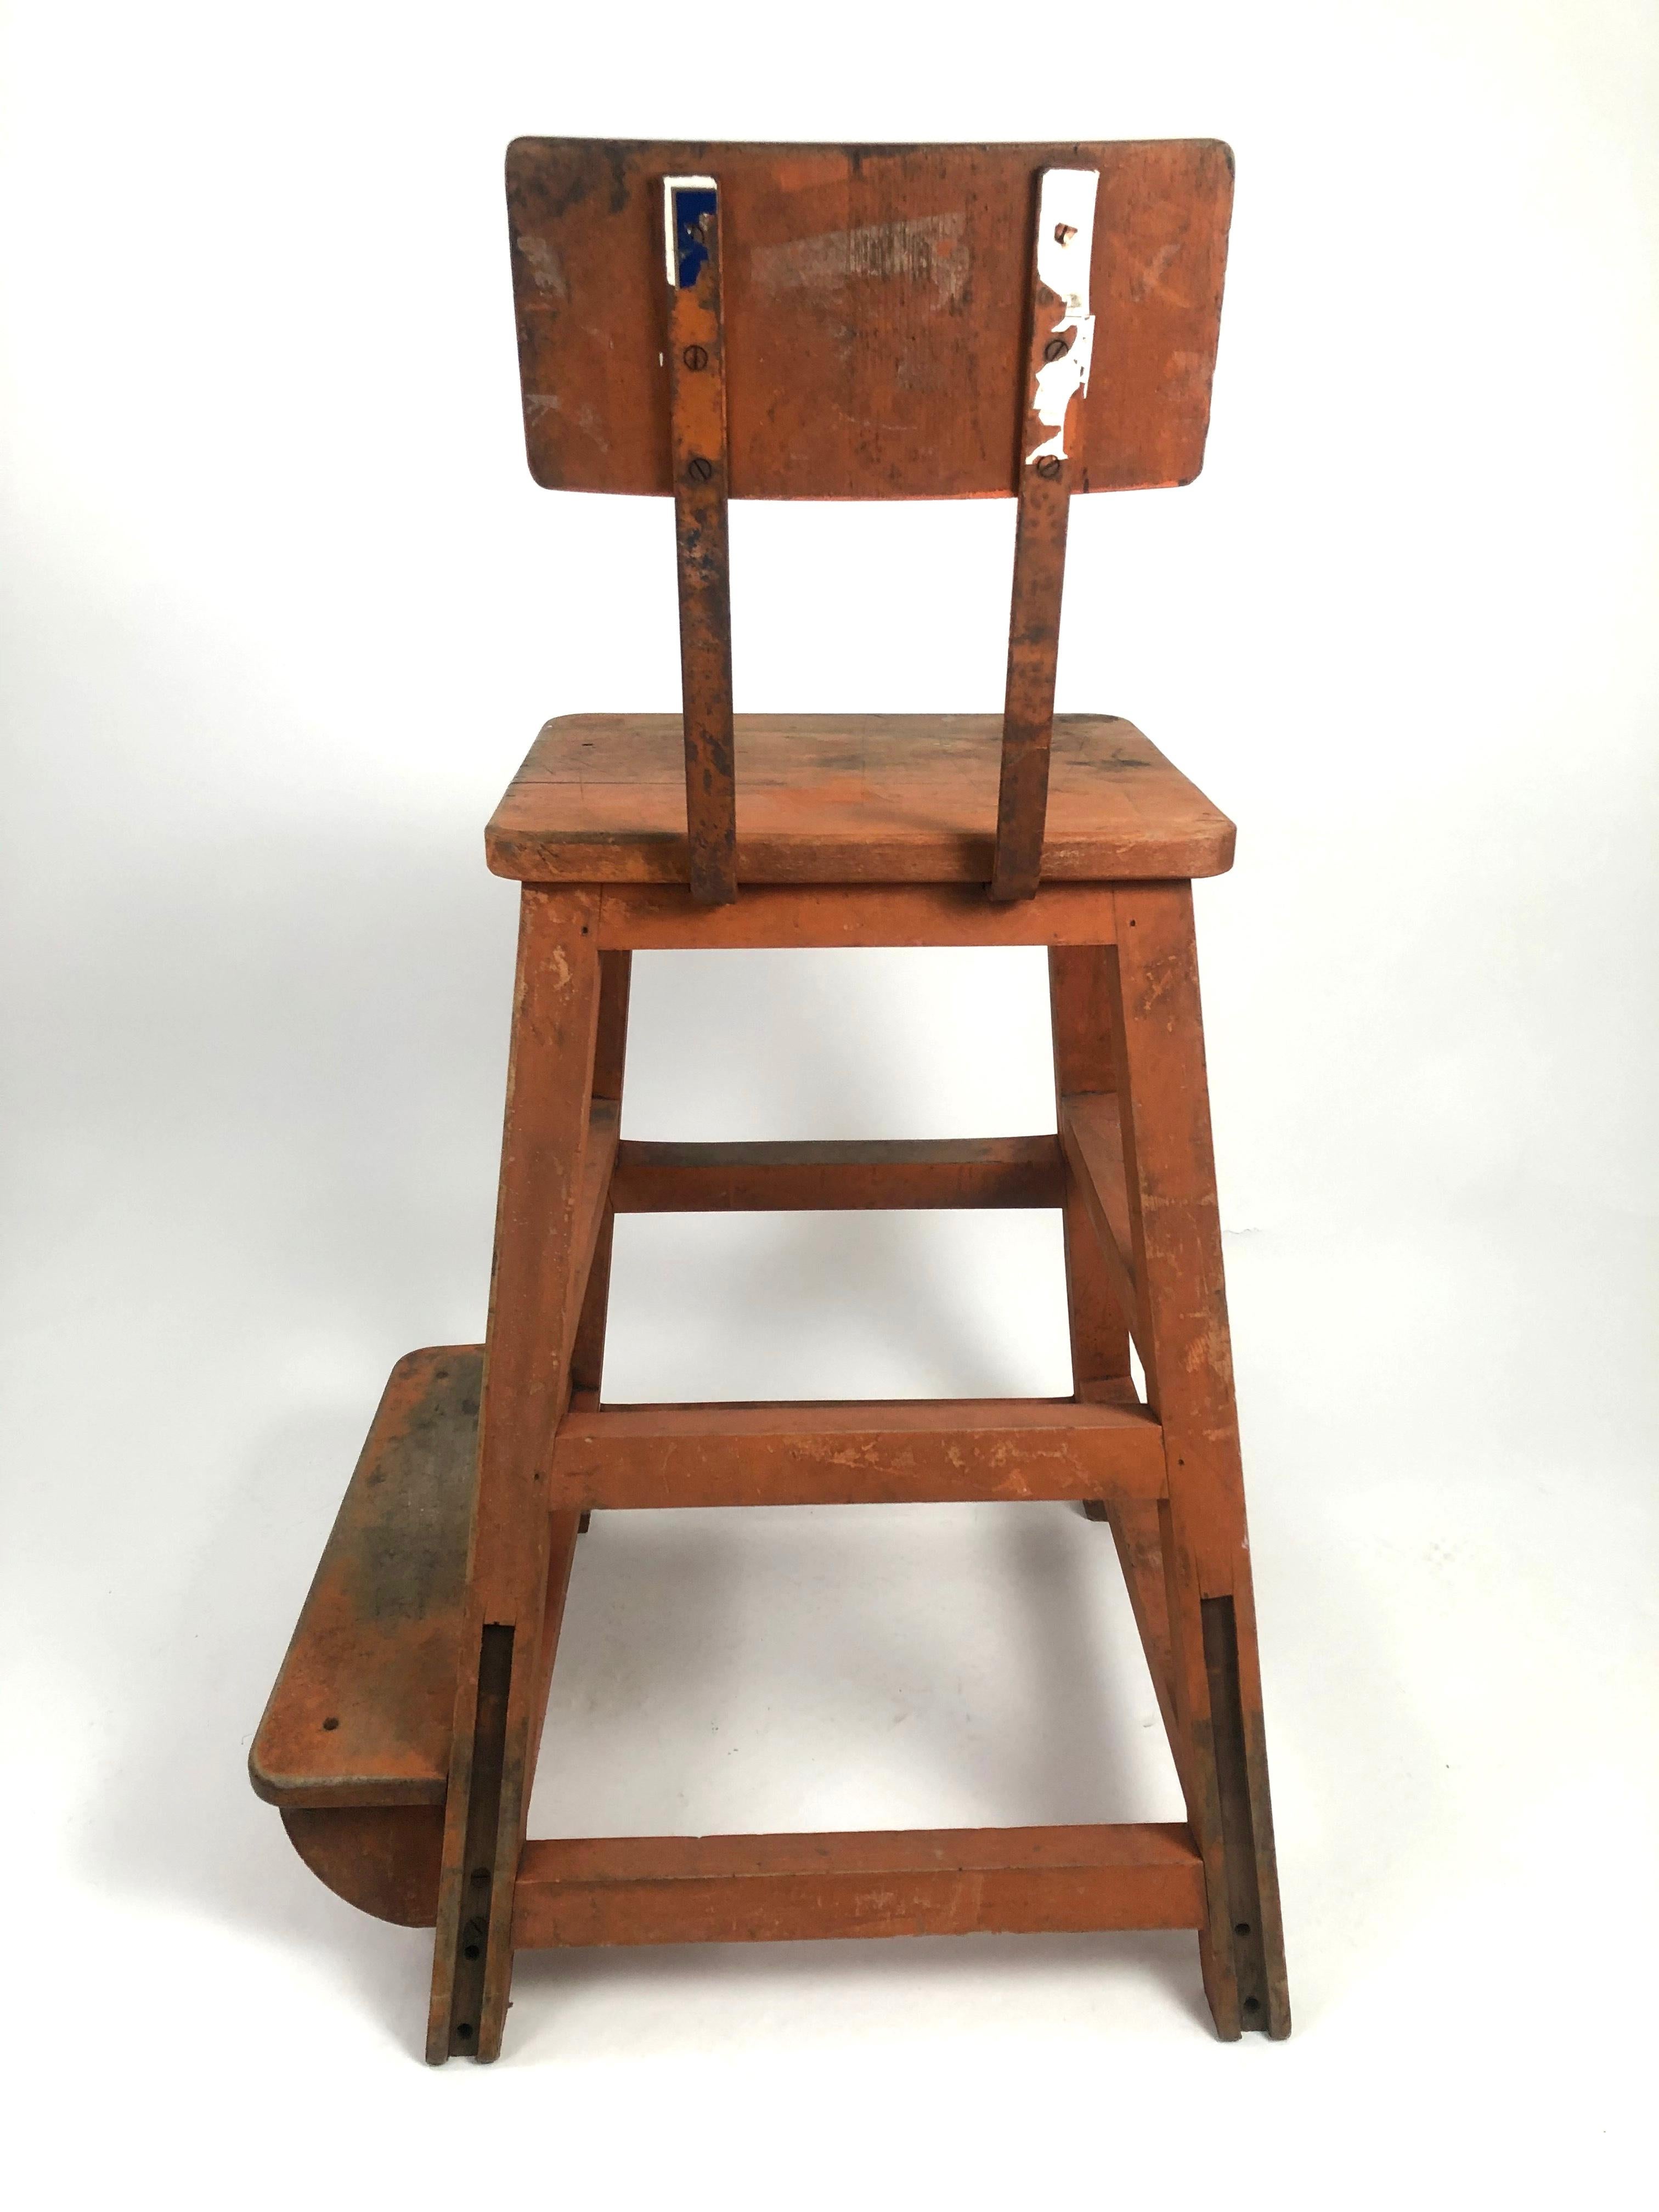 Iron Orange Painted Wood and Metal Industrial Factory Stool, circa 1920s